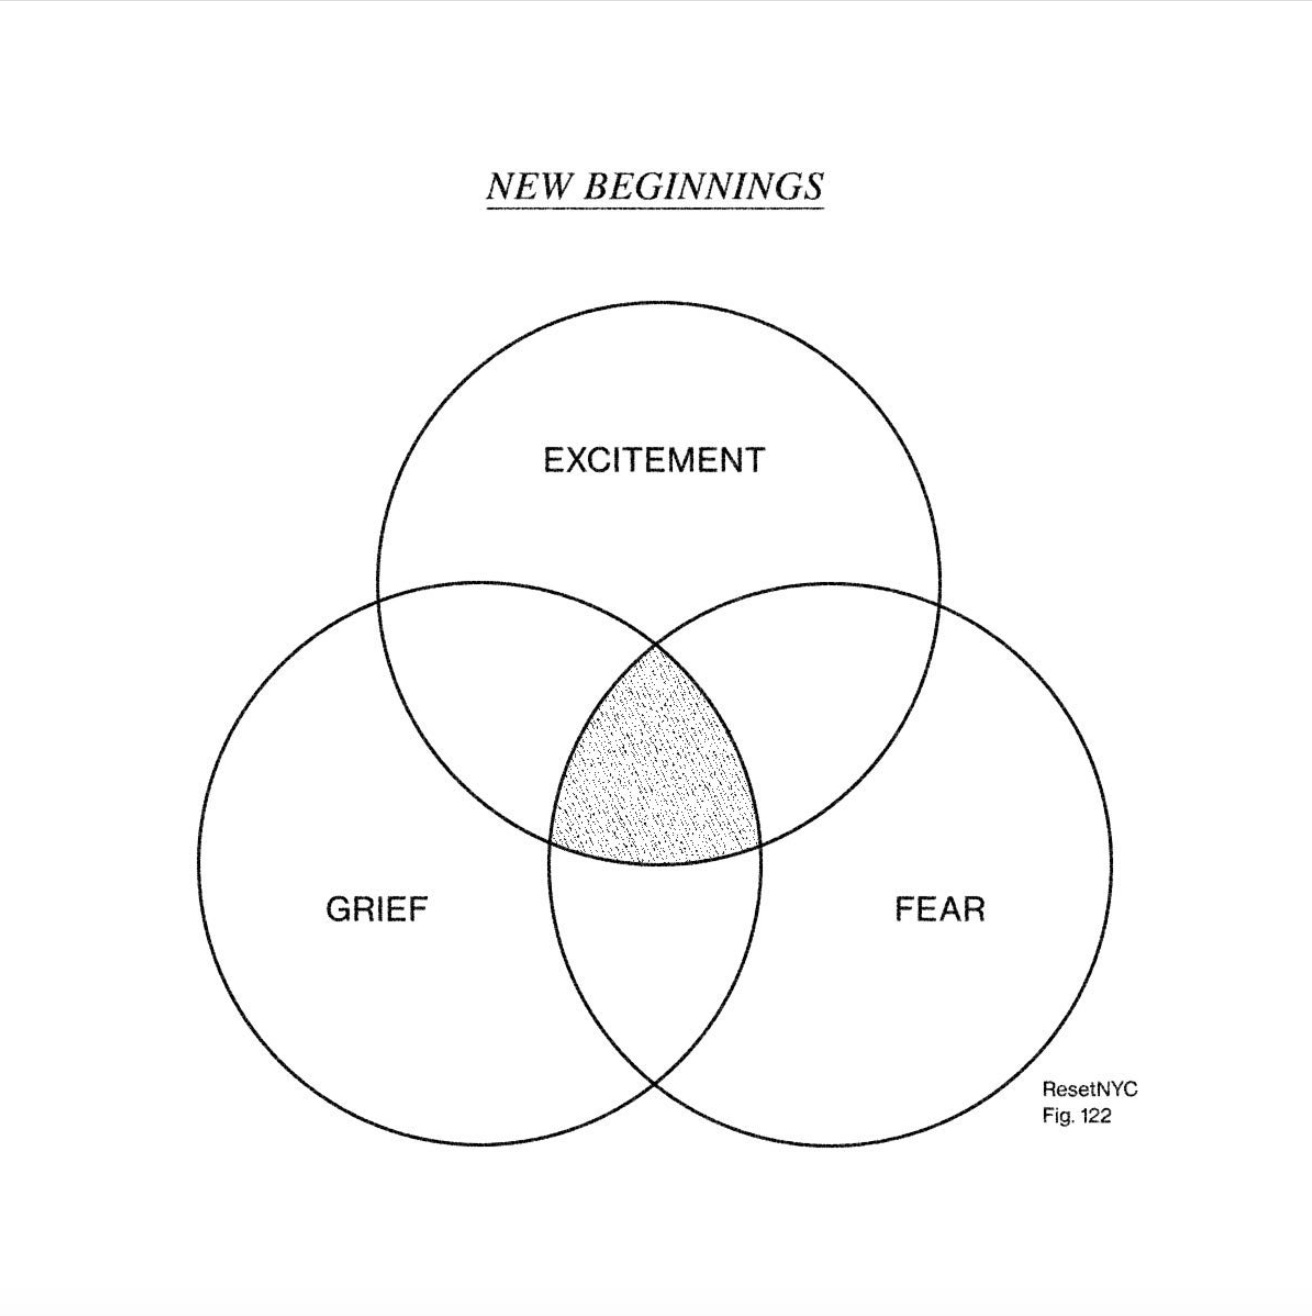 a triage venn diagram with the text above reading, "New Beginnings". The top circle has the text, "excitement" inside of it, the second circle in the bottom left has the text, "grief" inside of it, the third circle in the bottom right has the text, "fear" inside of it. This is an image from ResetNYC